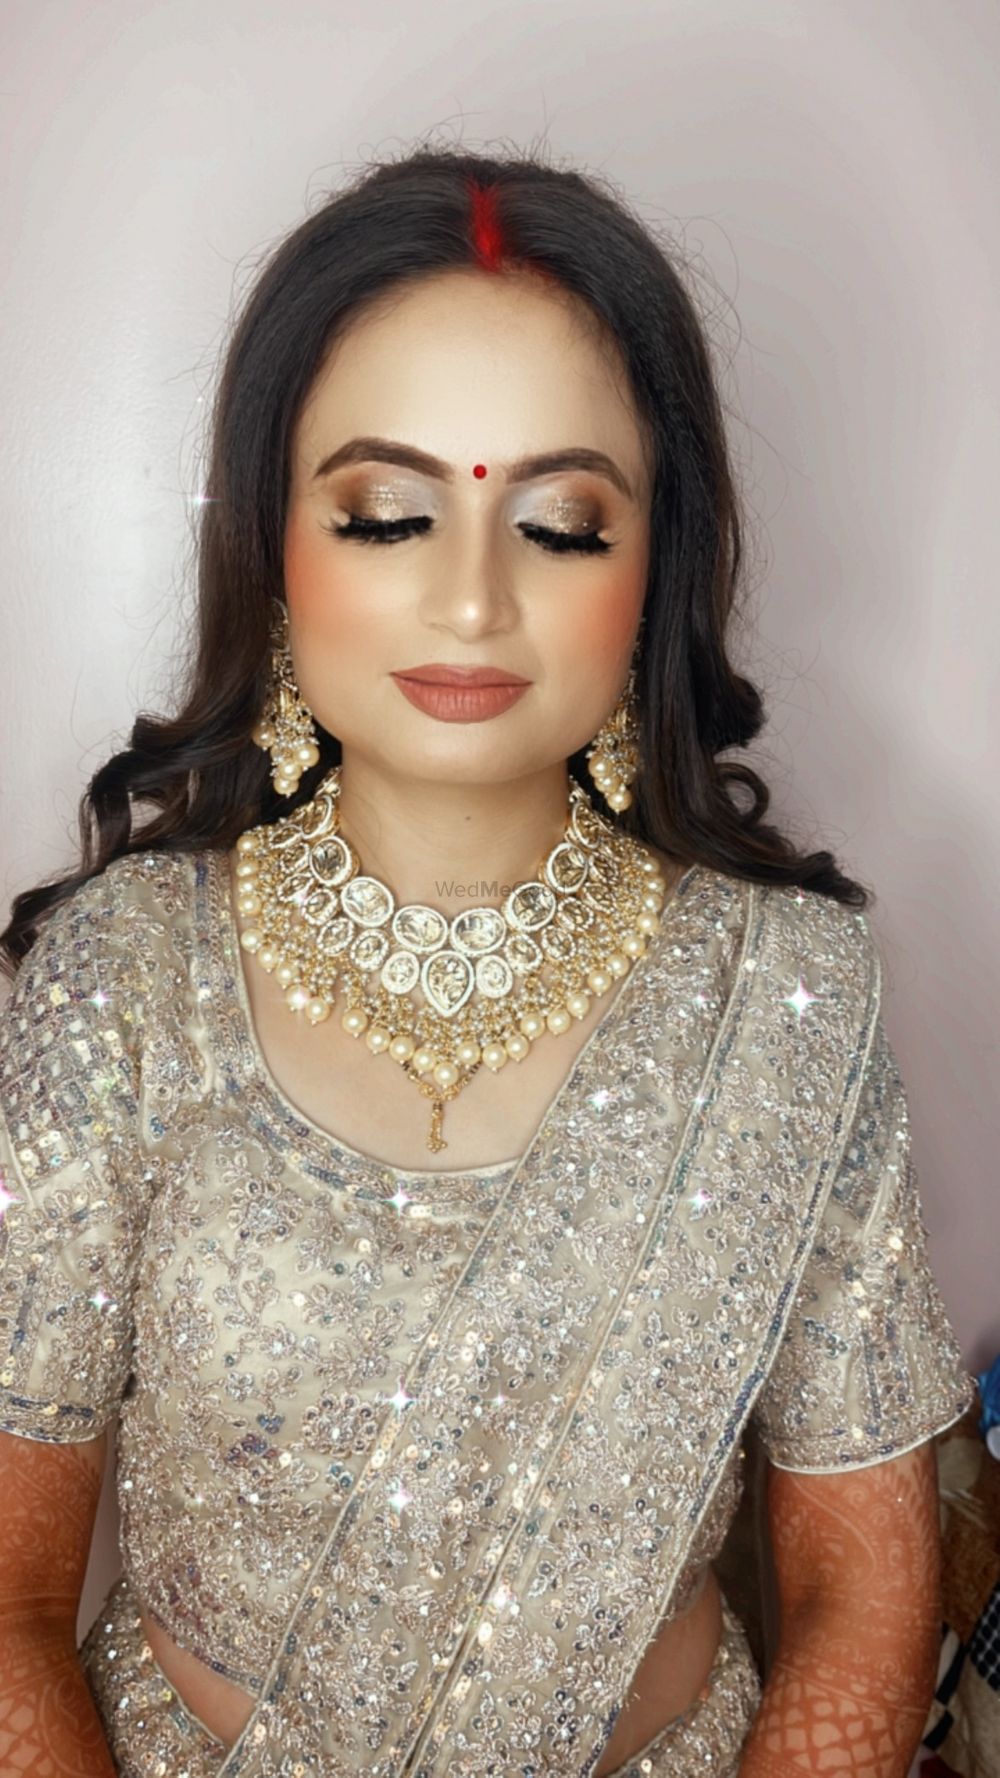 Photo By Neha Makeovers - Bridal Makeup